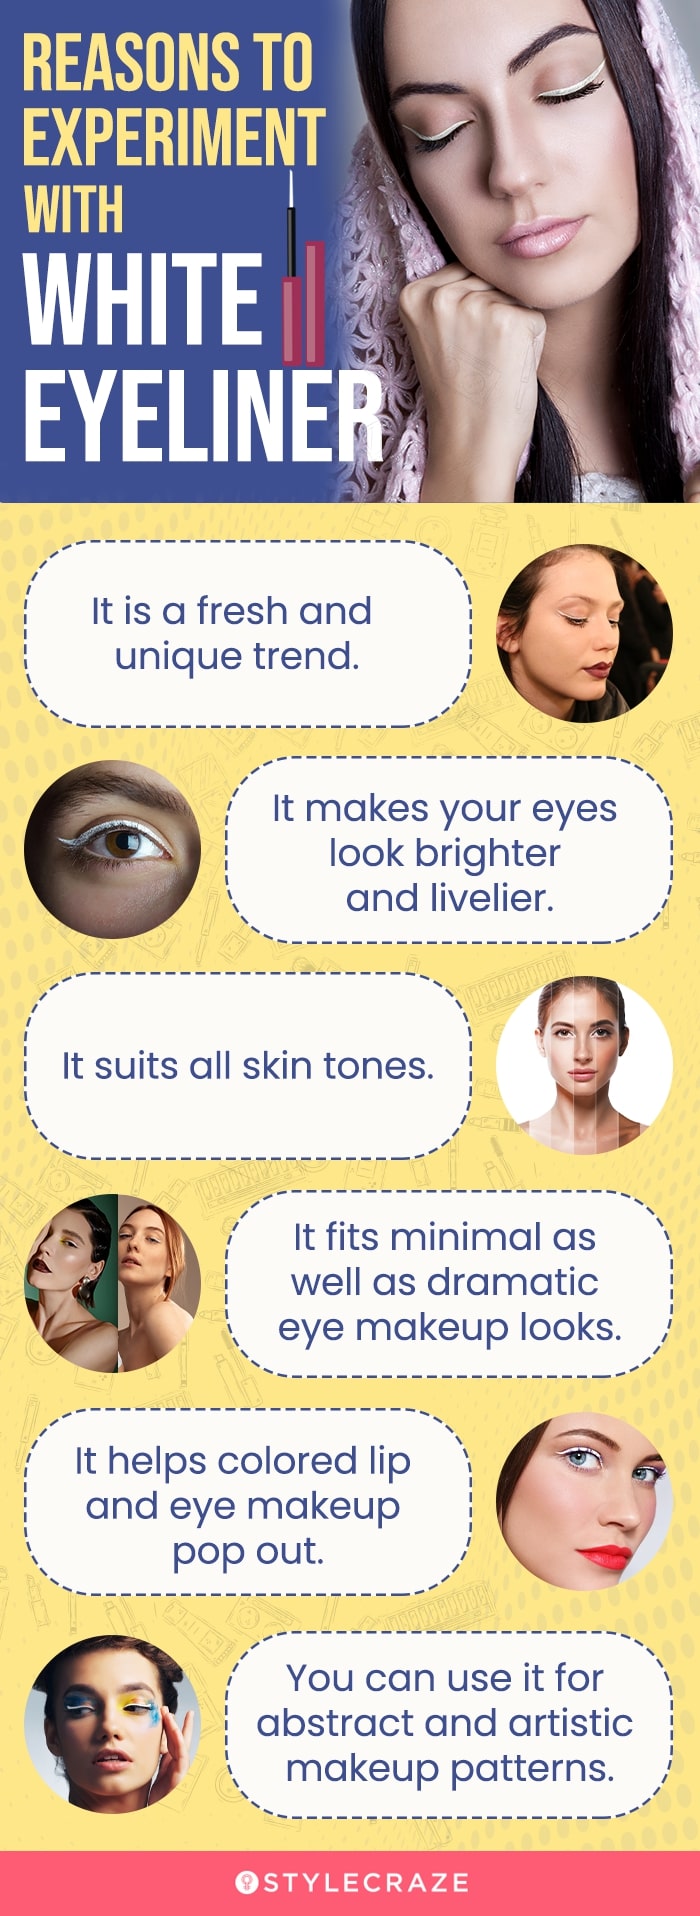 reasons to experiment with white eyeliner [infographic]